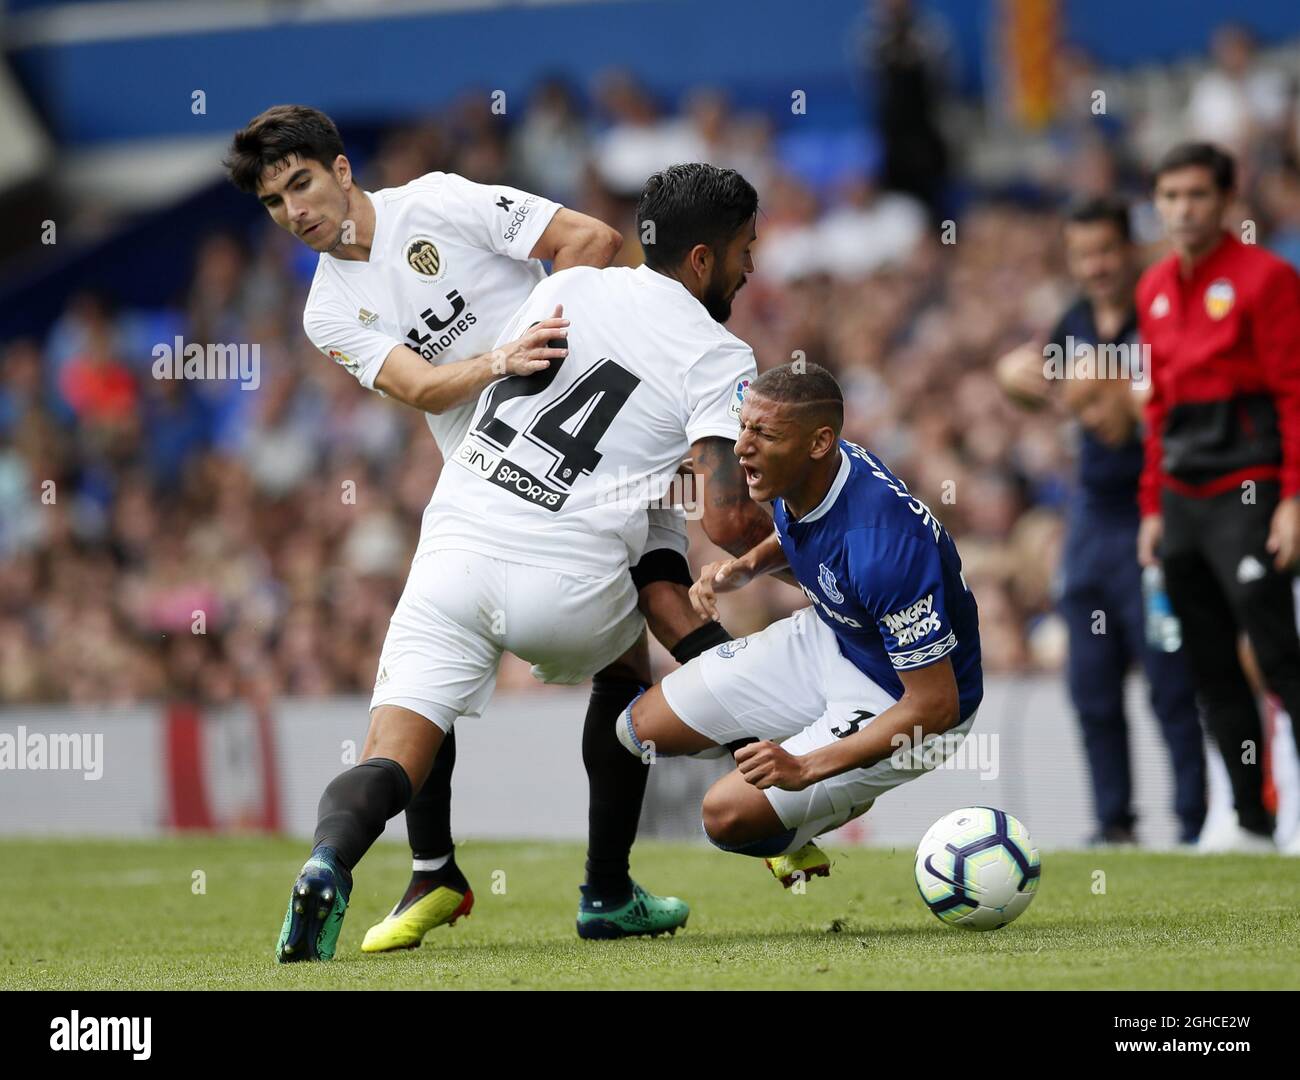 Everton's Richarlison tussles with Valencia's Ezequiel Garay during the pre-season friendly match at the Goodison Park Stadium, Liverpool. Picture date 4th August 2018. Picture credit should read: David Klein/Sportimage via PA Images Stock Photo